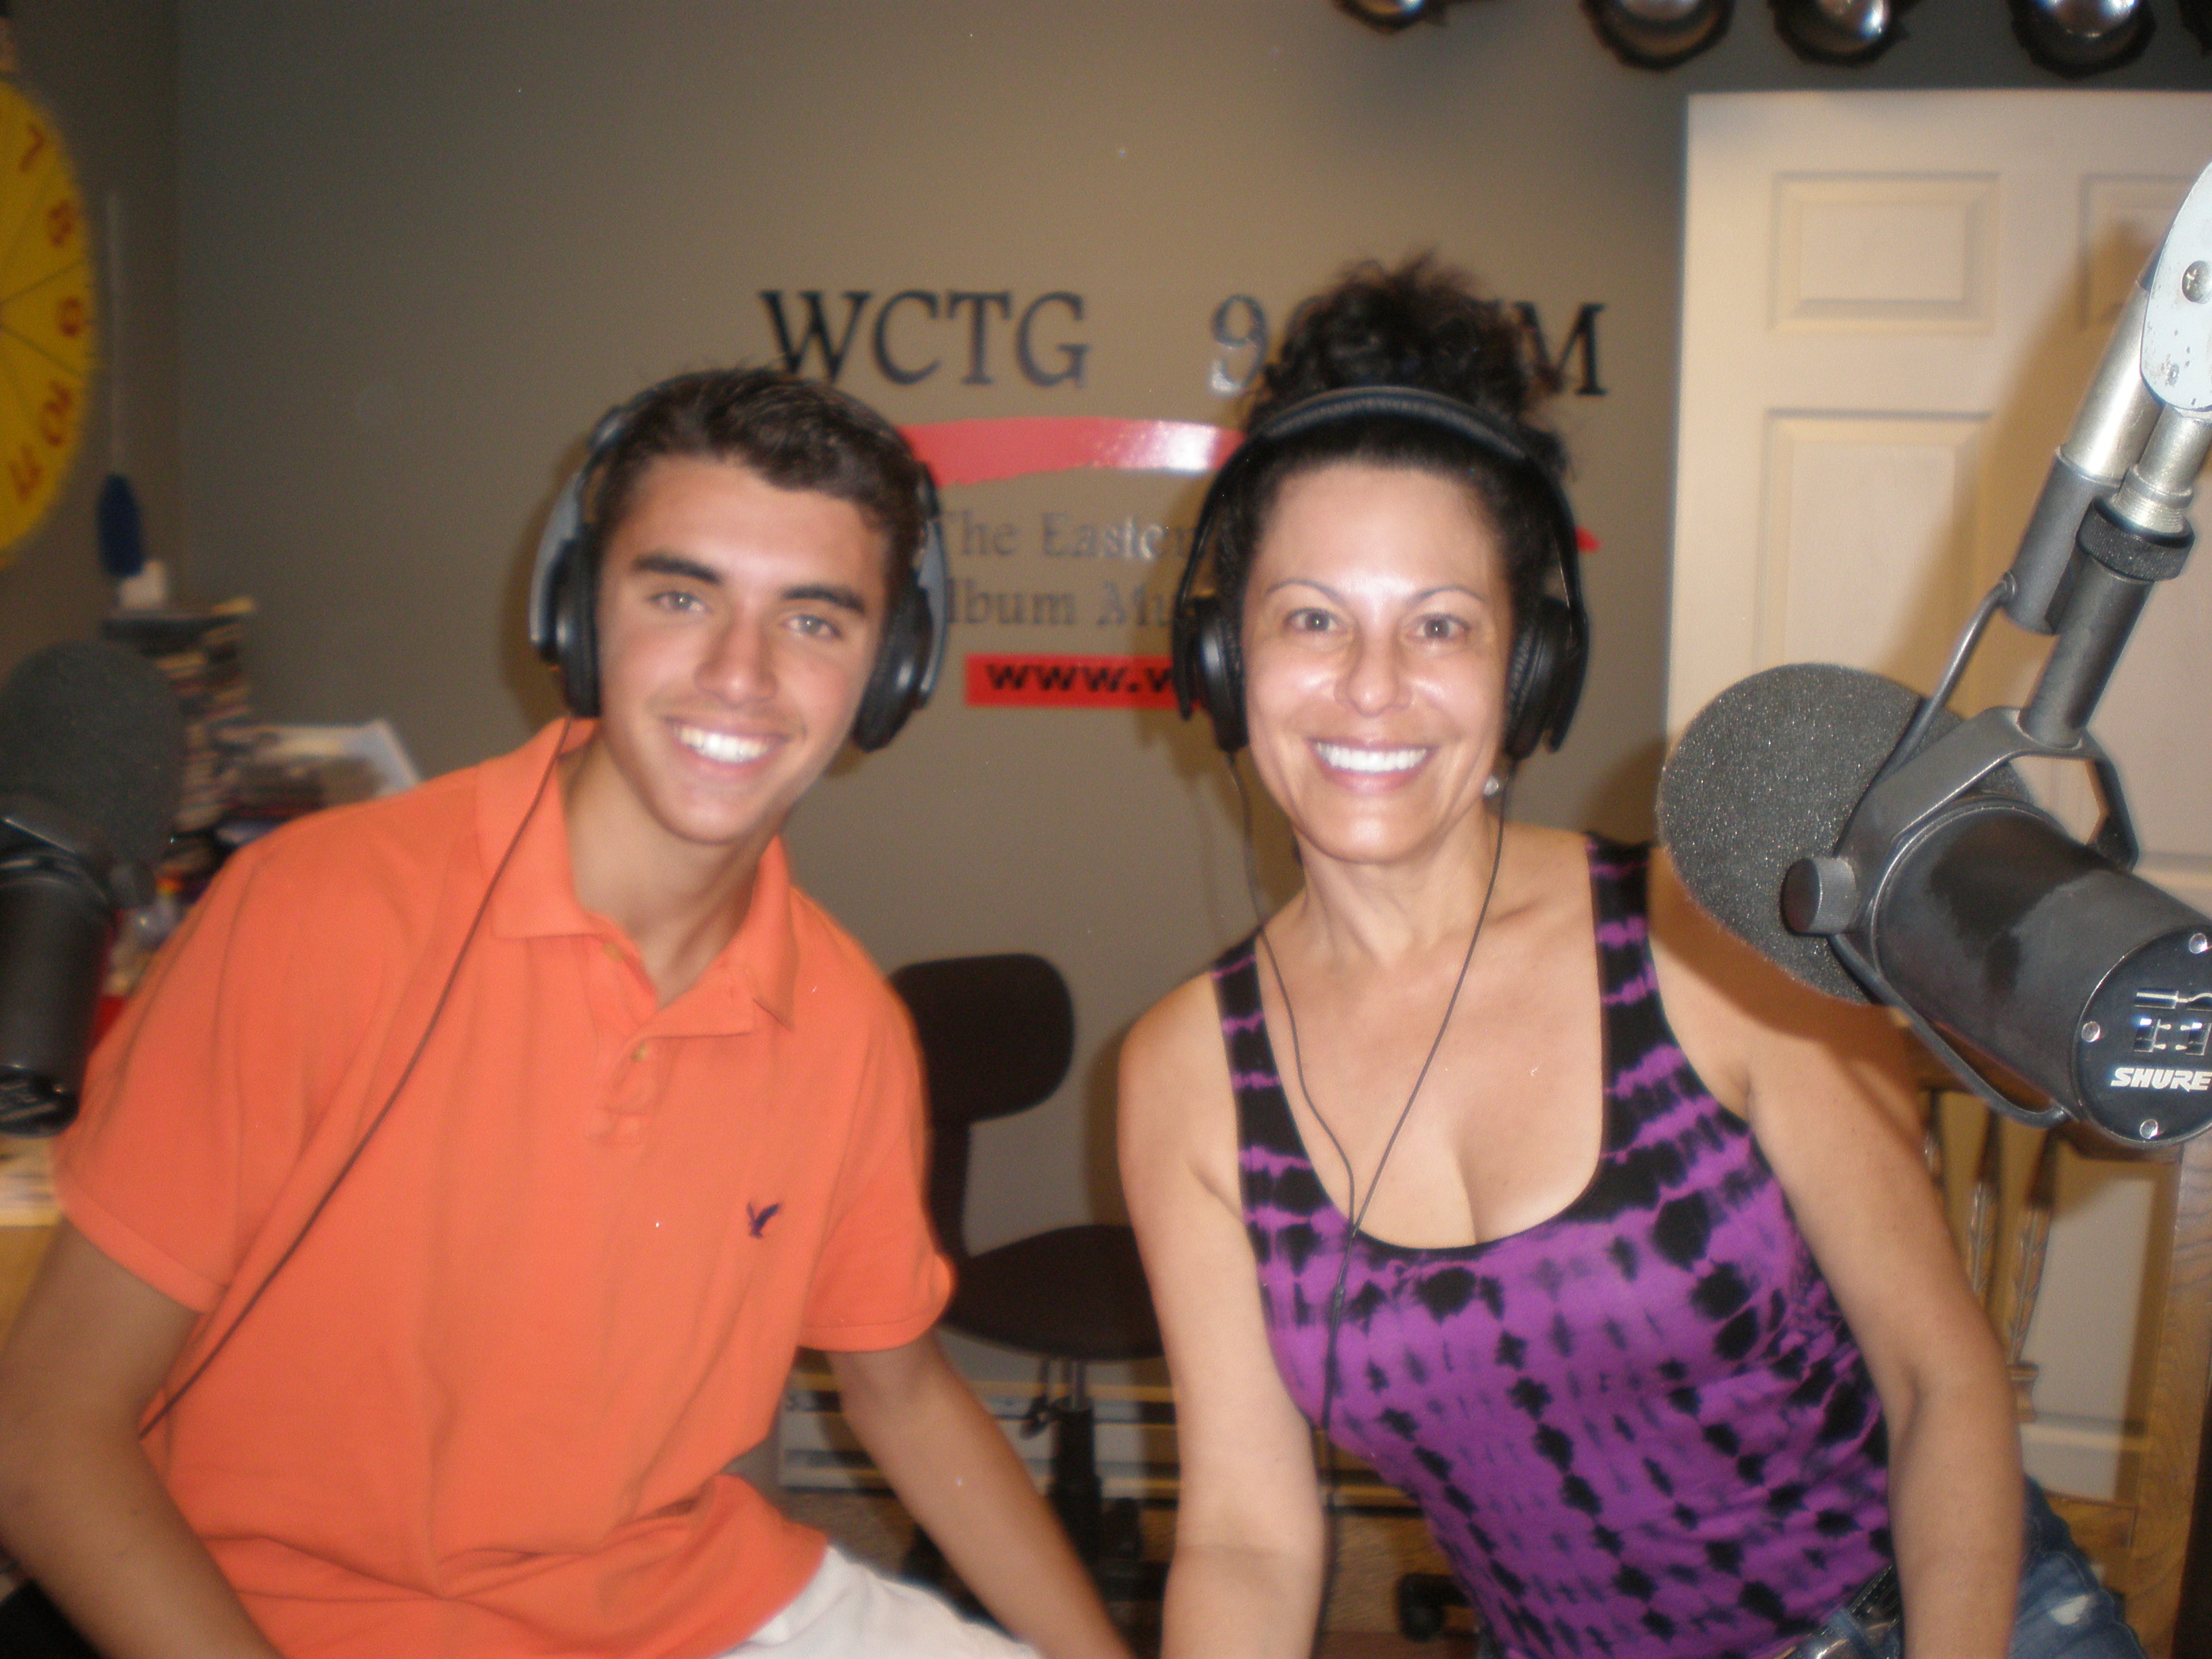 July 2012 Radio interview Chincoteague, Virginia WCTG 96.5fm Christopher and Robin Rothschild